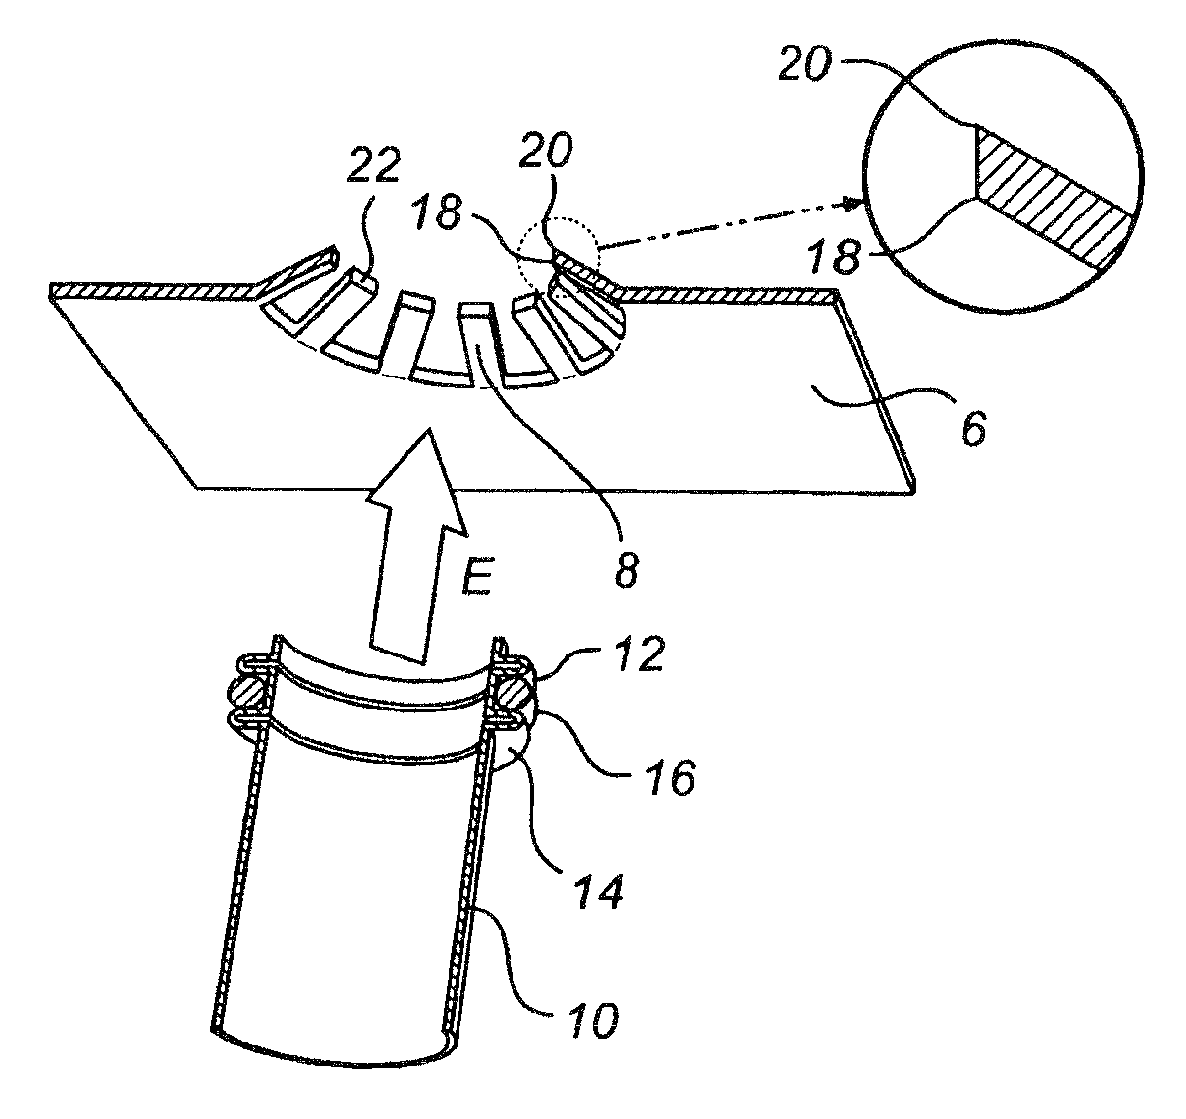 Fuel dispensing unit comprising a locking member for retaining a fuel conduit in a locked position